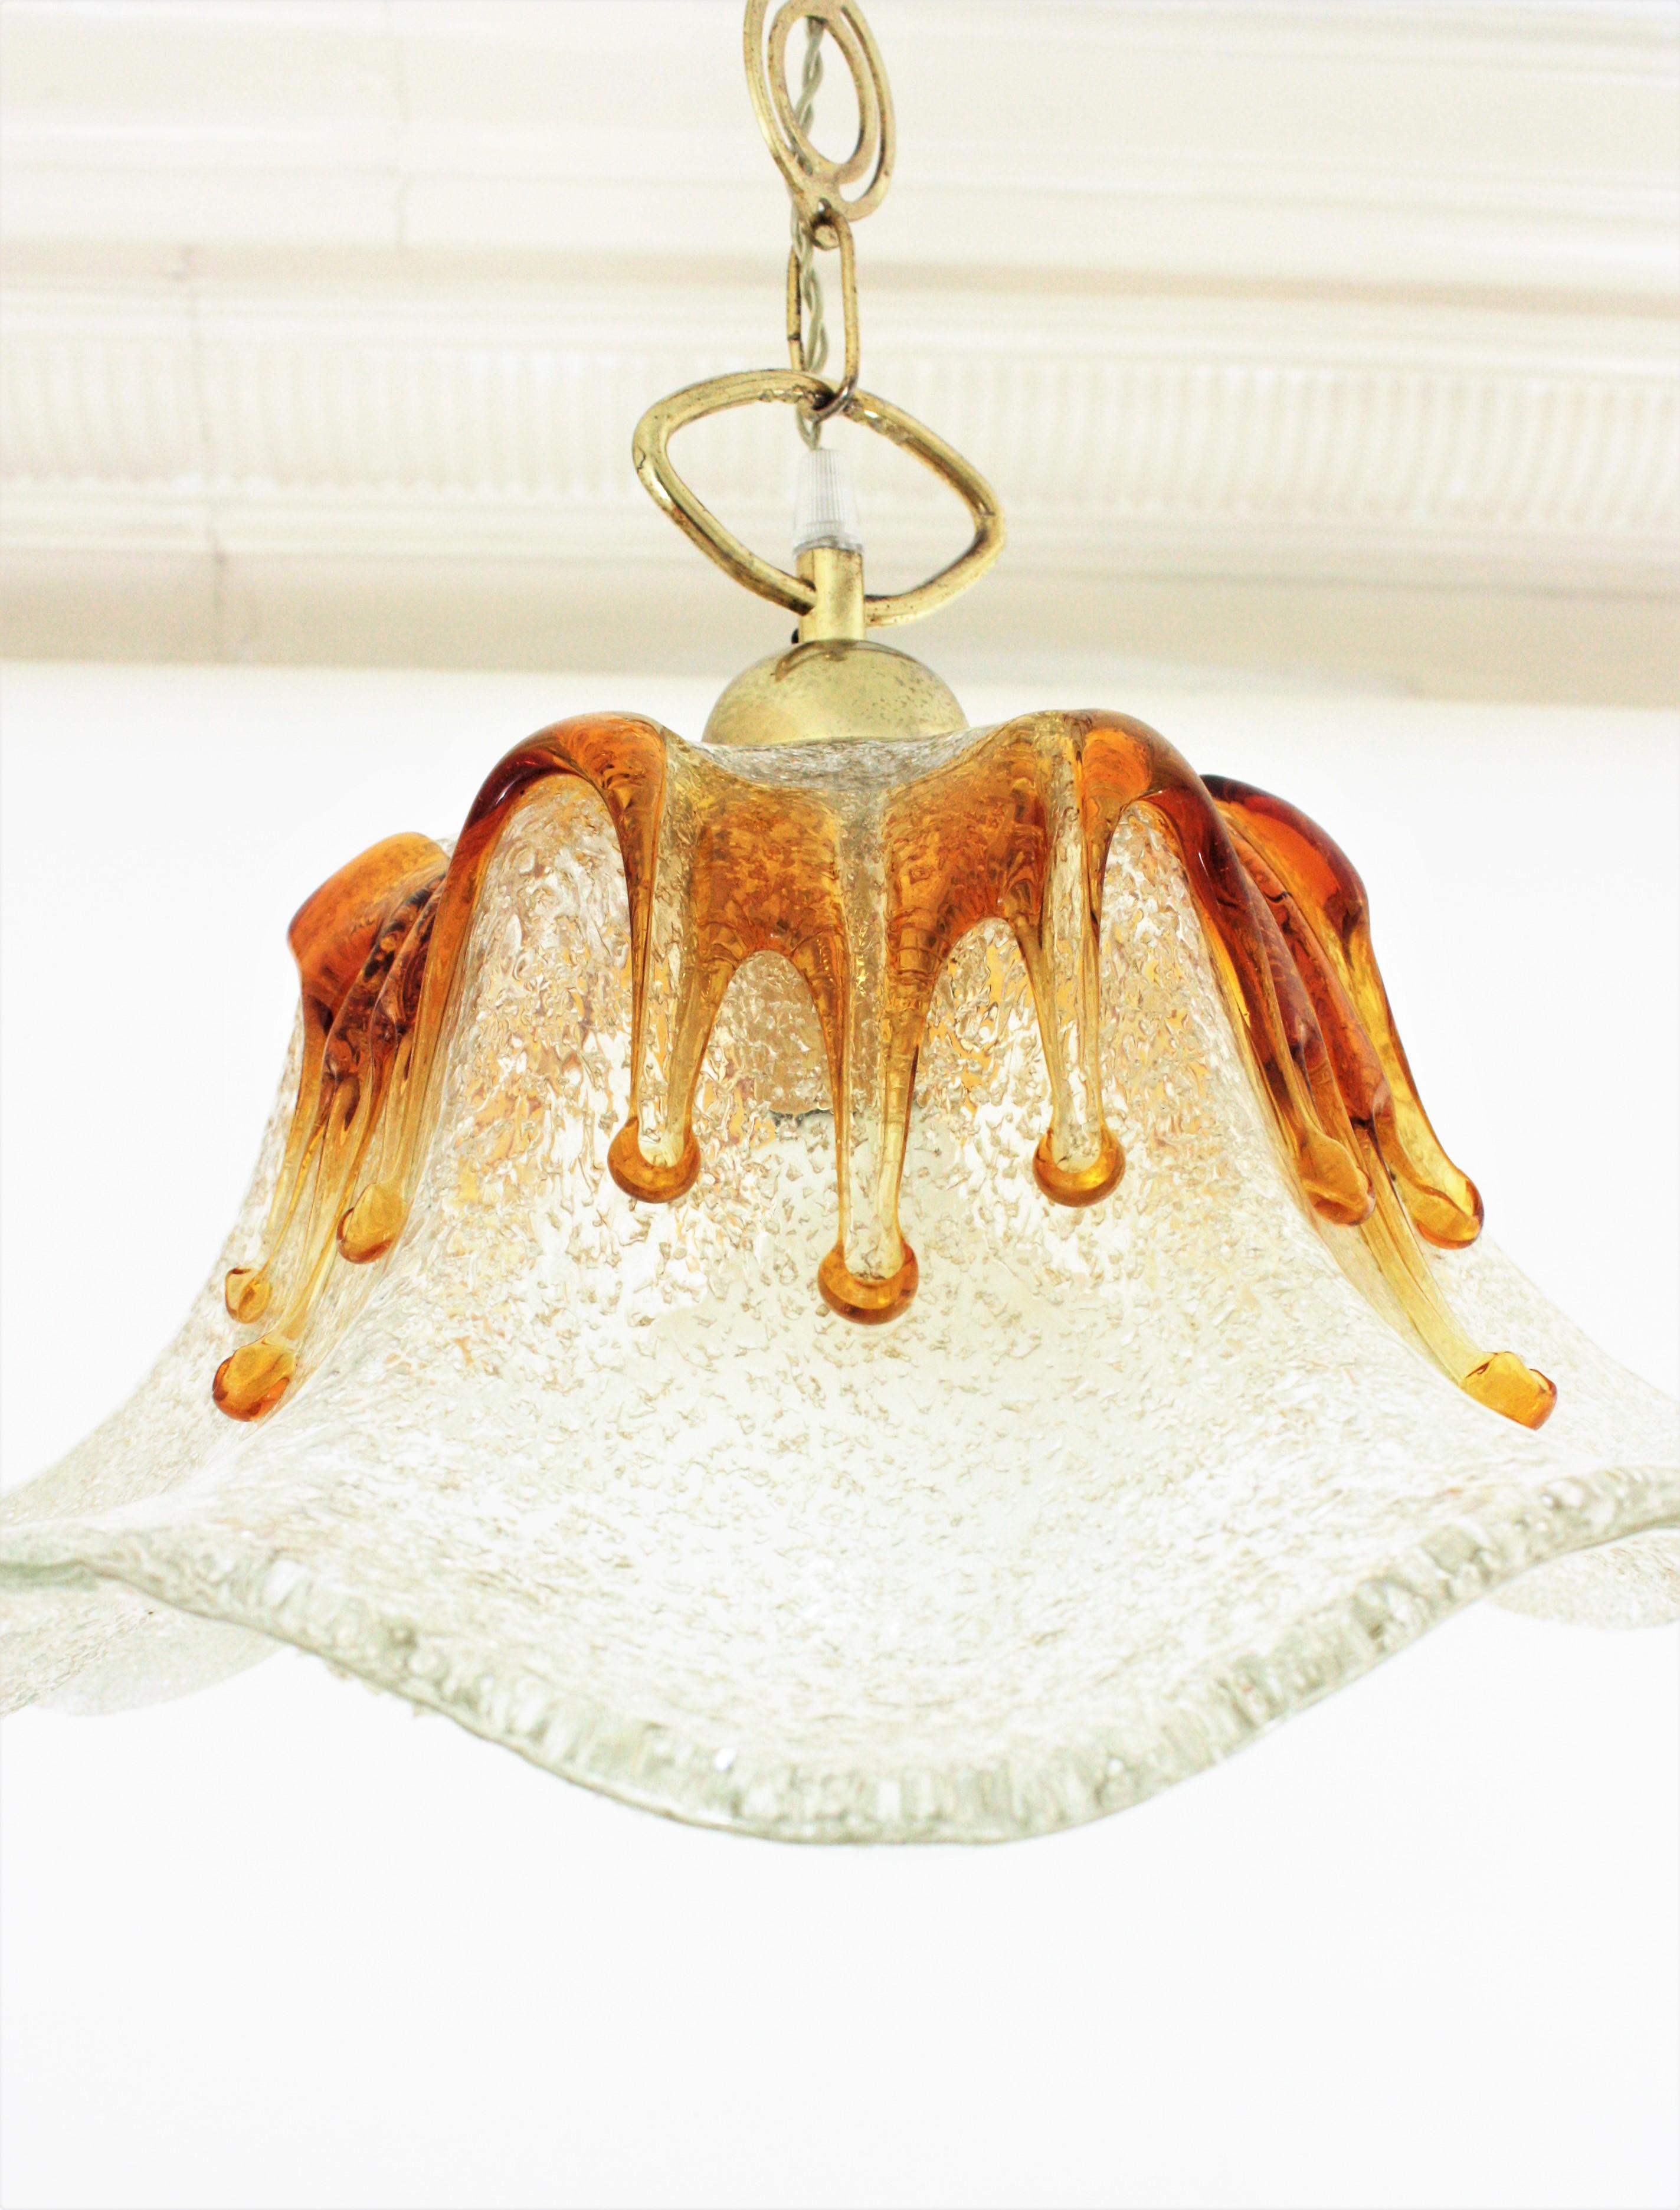 Hand-Crafted Mazzega Murano Tulip Amber and Clear Art Glass Chandelier or Pendant For Sale